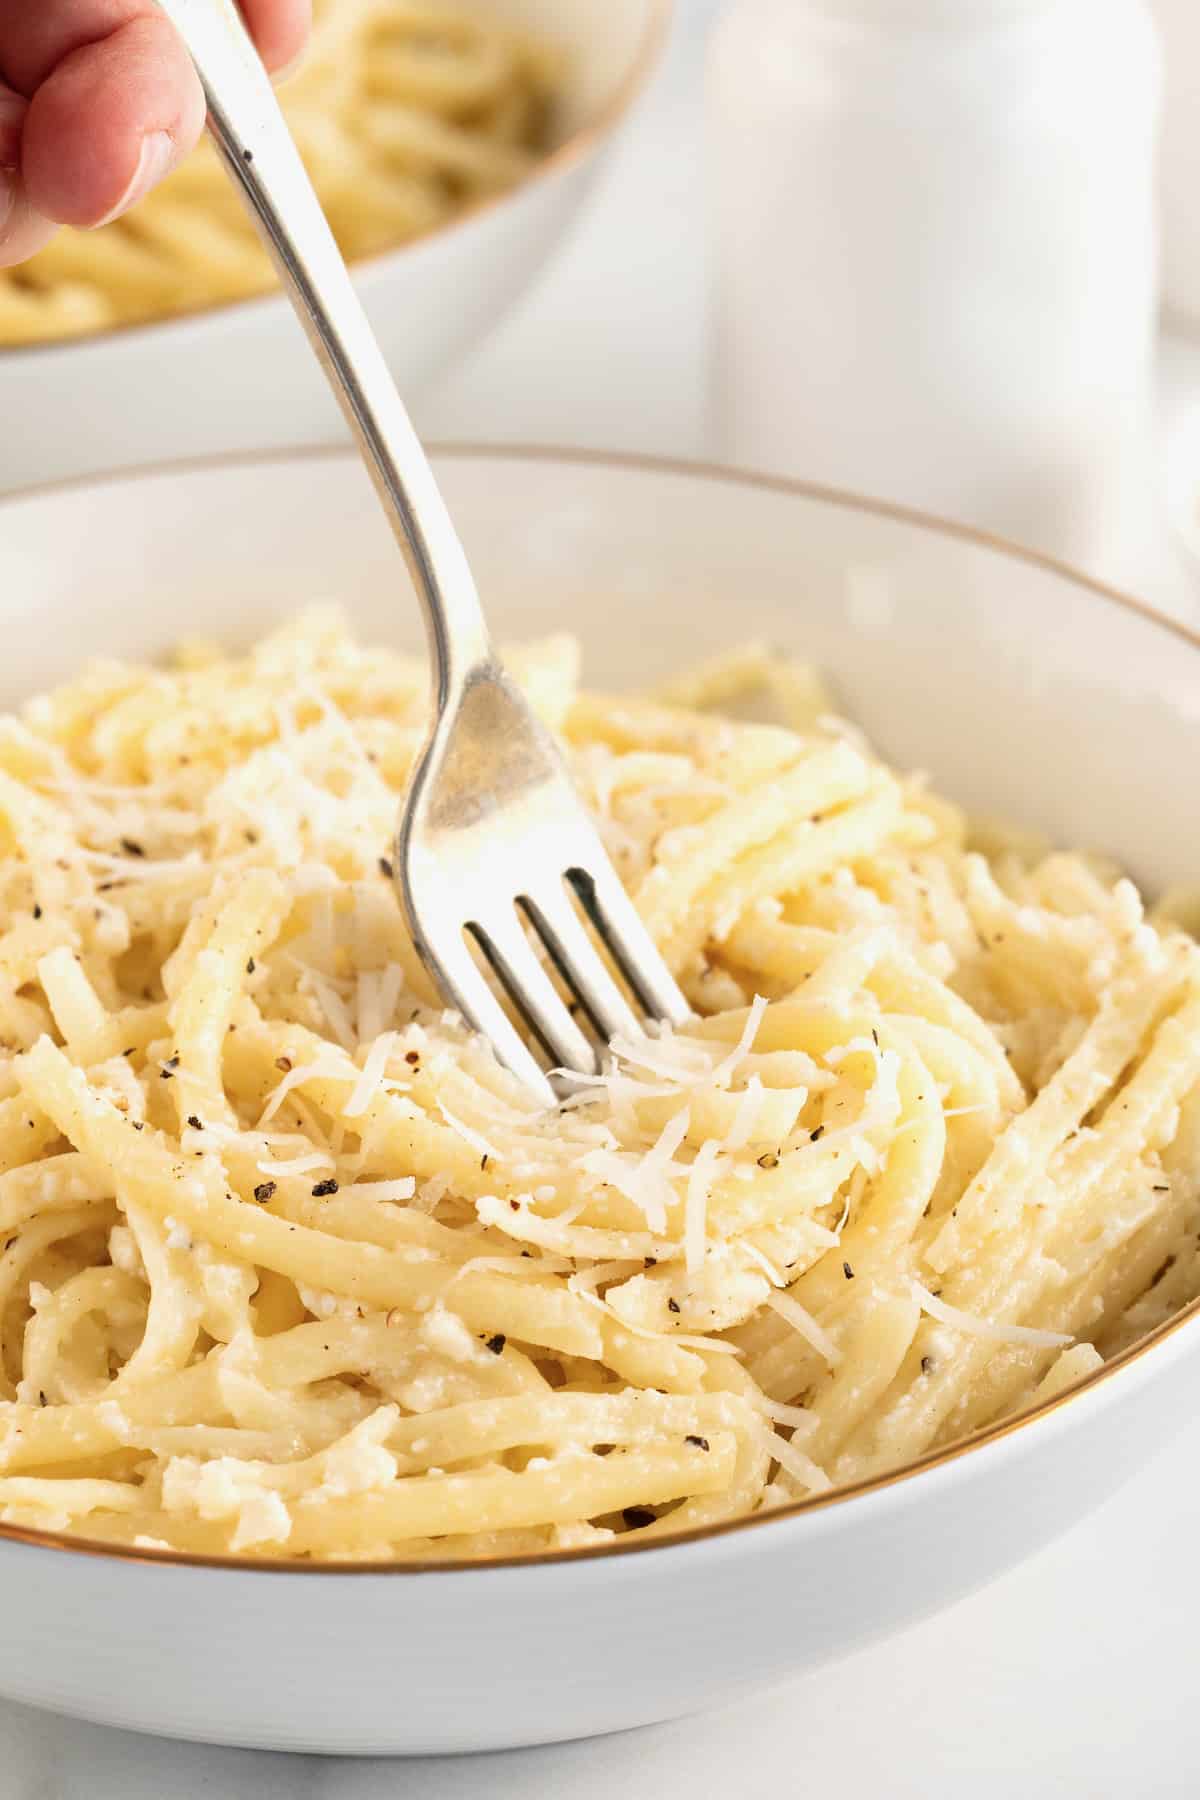 A fork in a white gold-rimmed bowl of pasta sprinkled with grated white cheese.